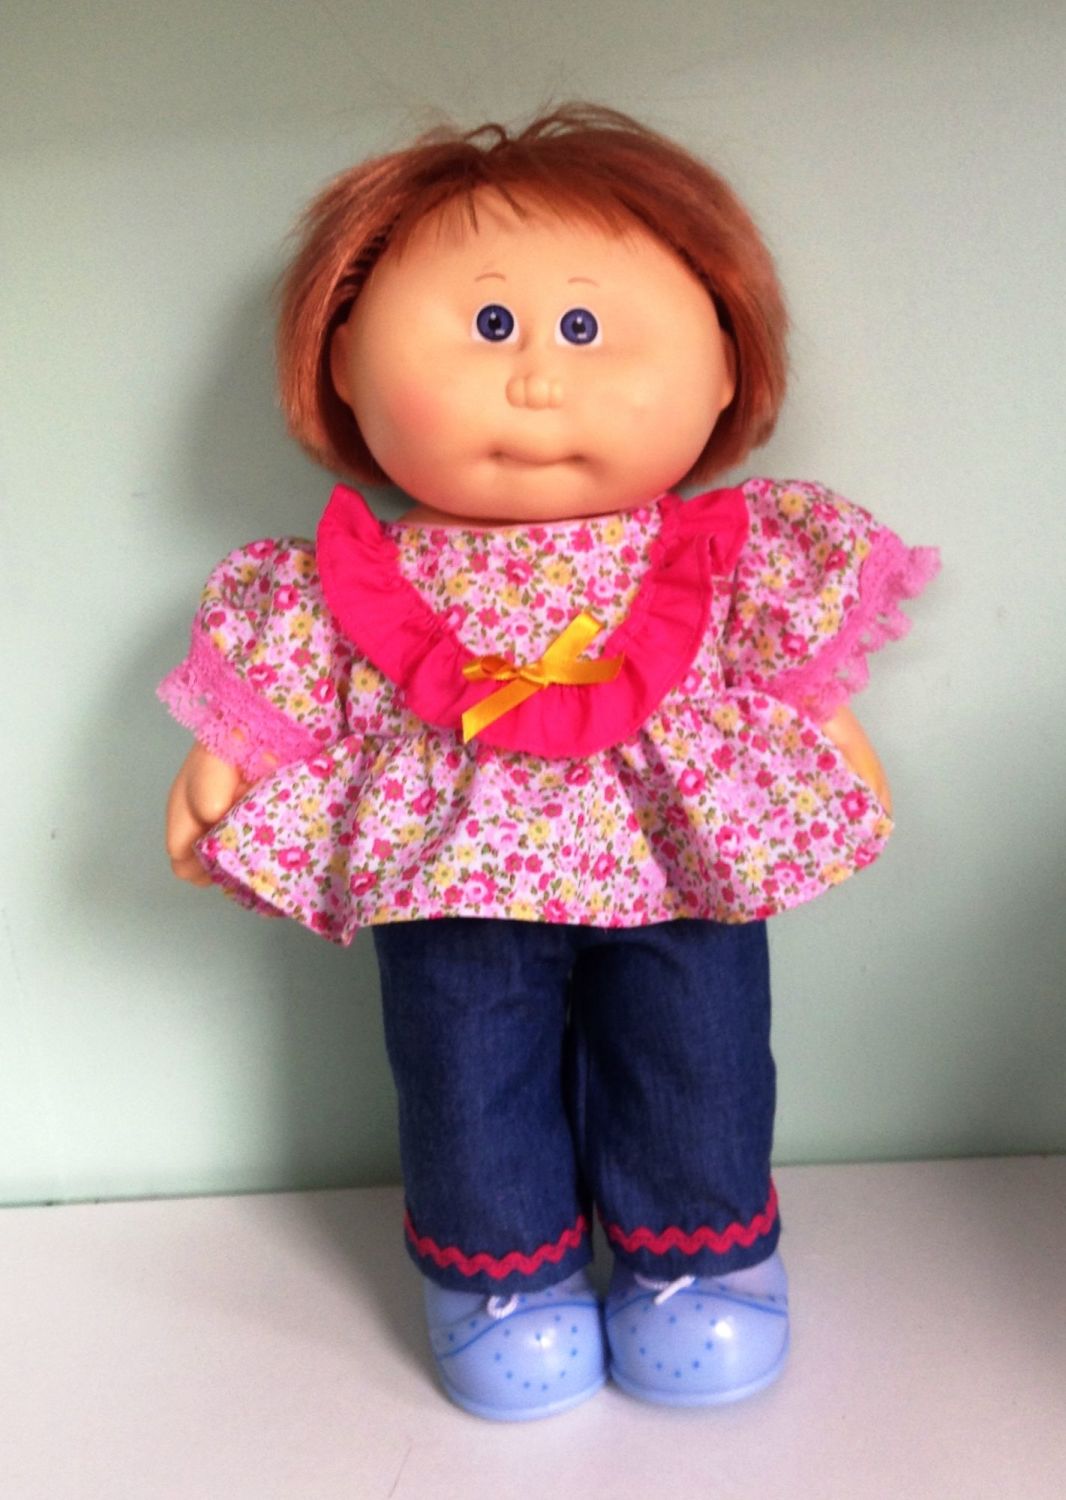 Doll's angel top and jeans set made to fit 14 inch high Cabbage patch doll.